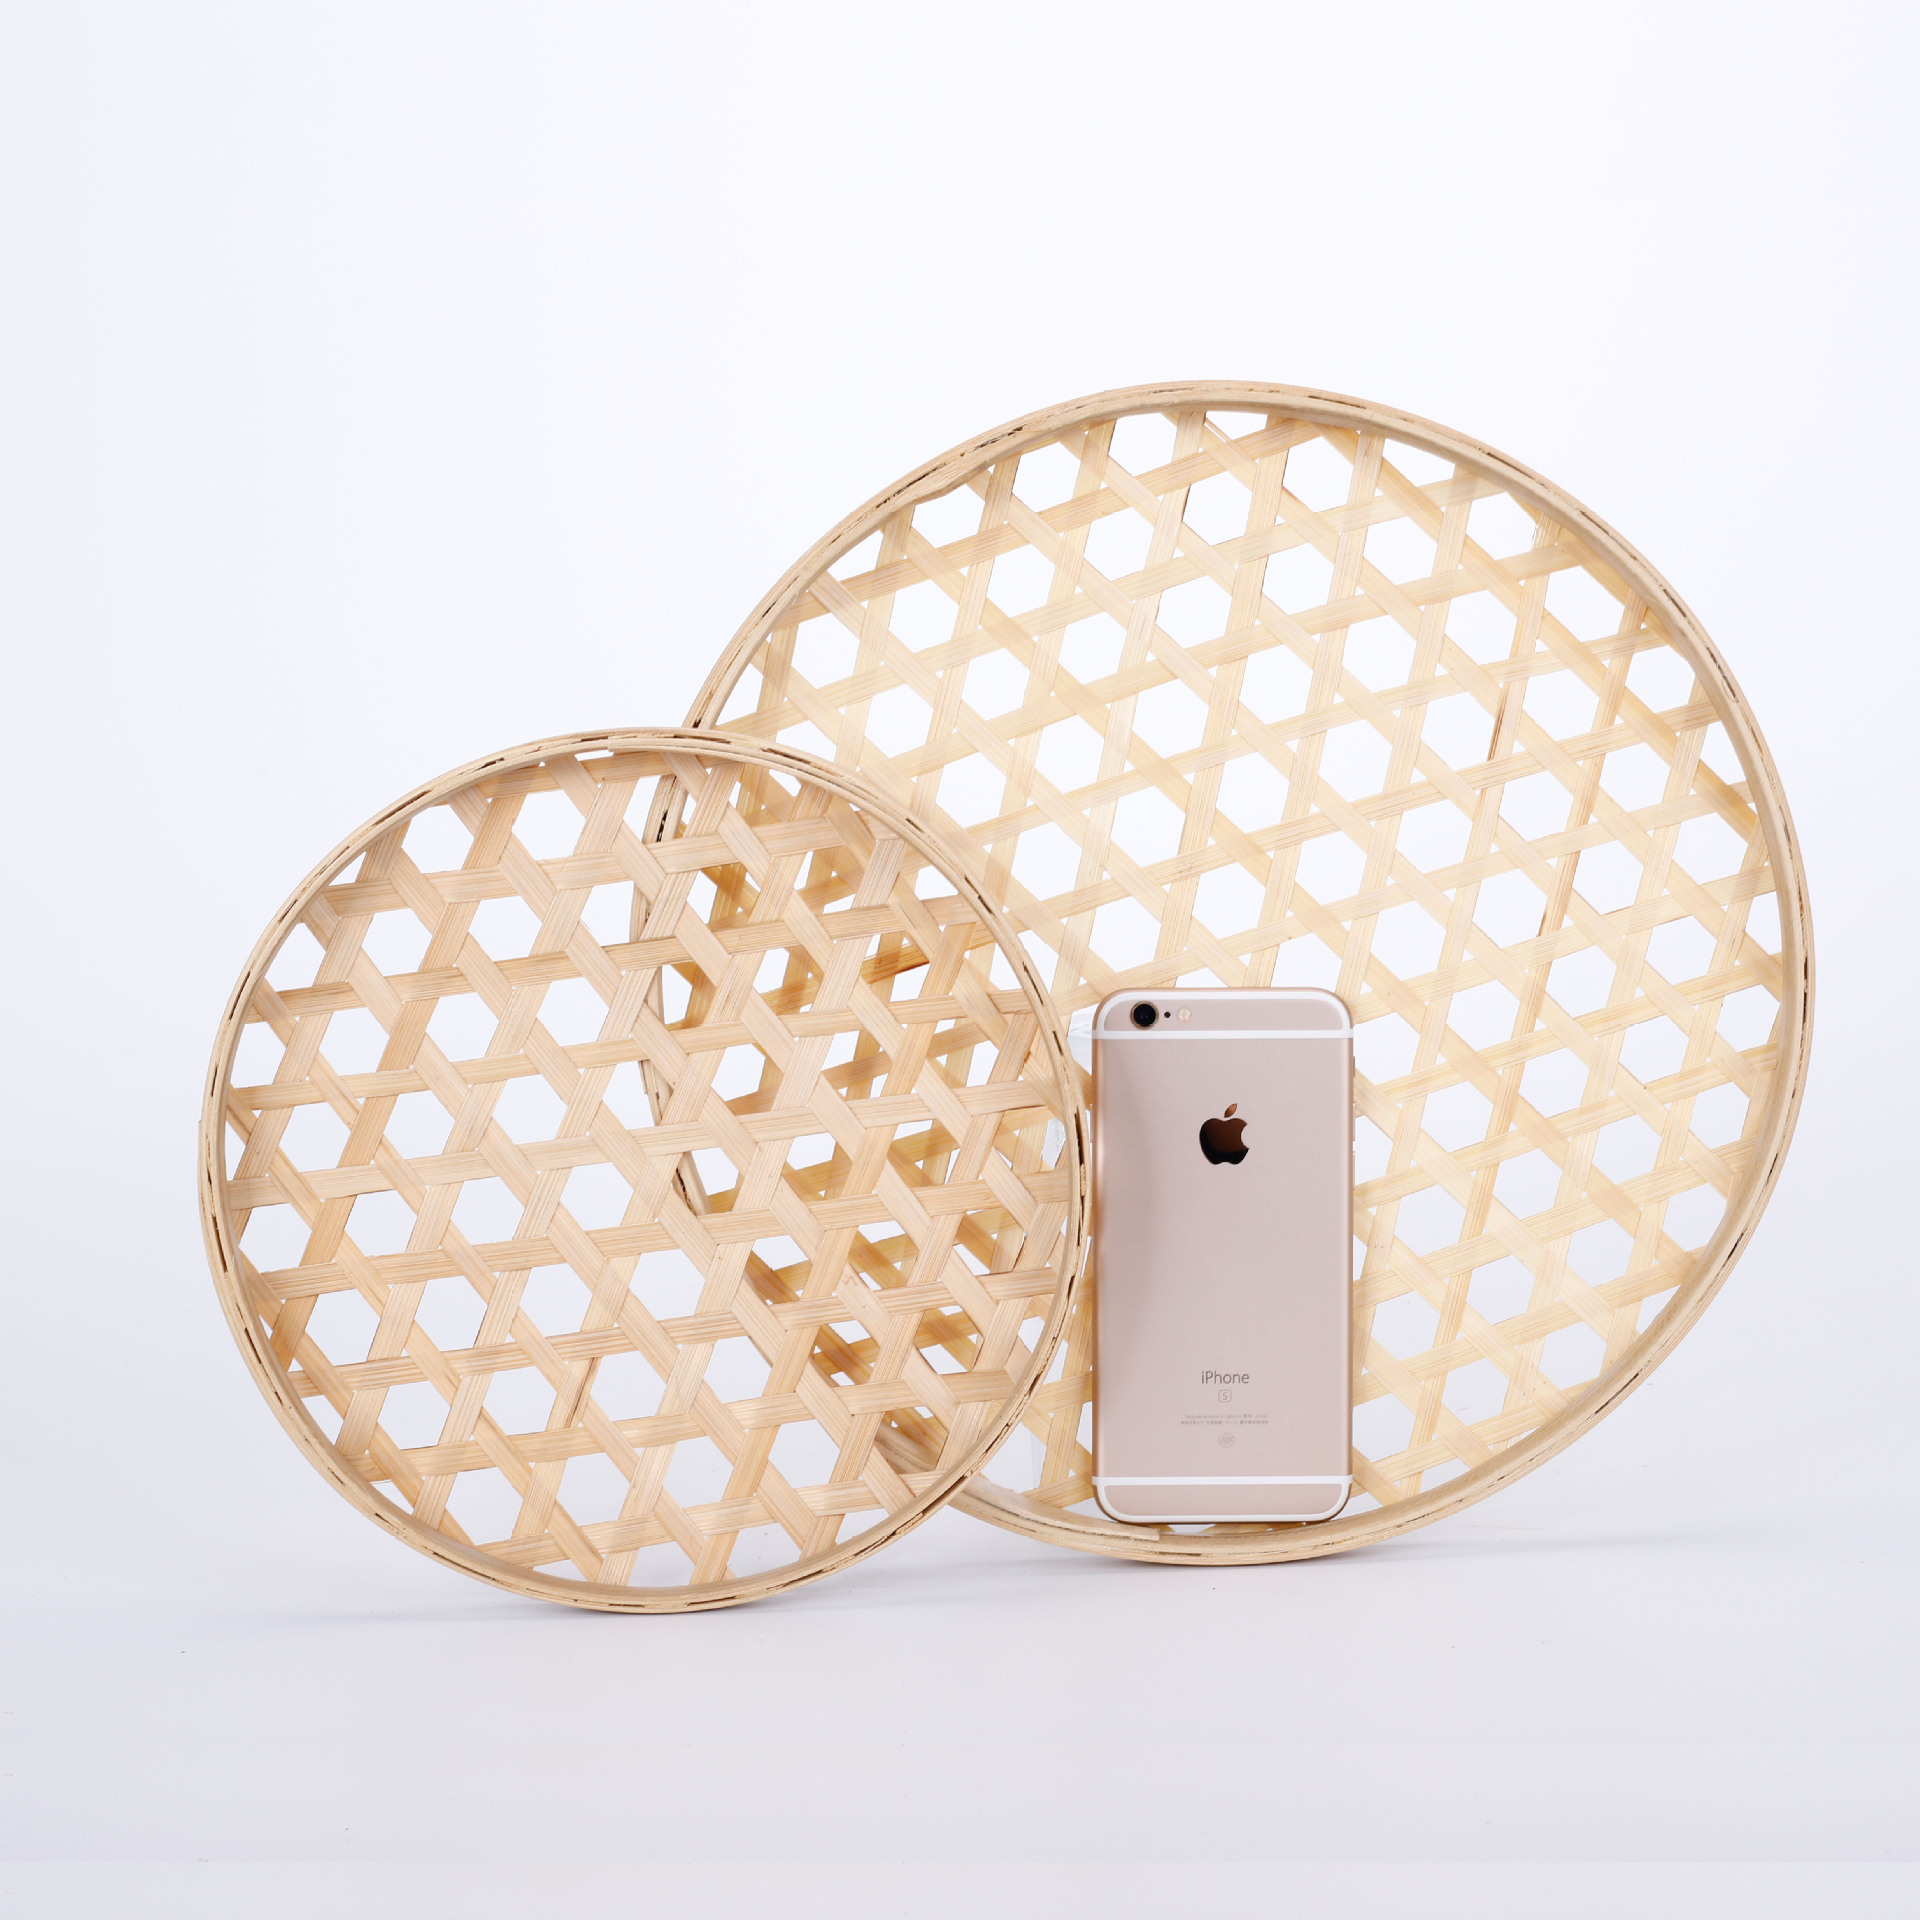 Factory Handmade Hole Hollow Bamboo Woven Dustpan Bamboo Sieve Bamboo Basket Bamboo Products Crafts Storage Basket Wholesale